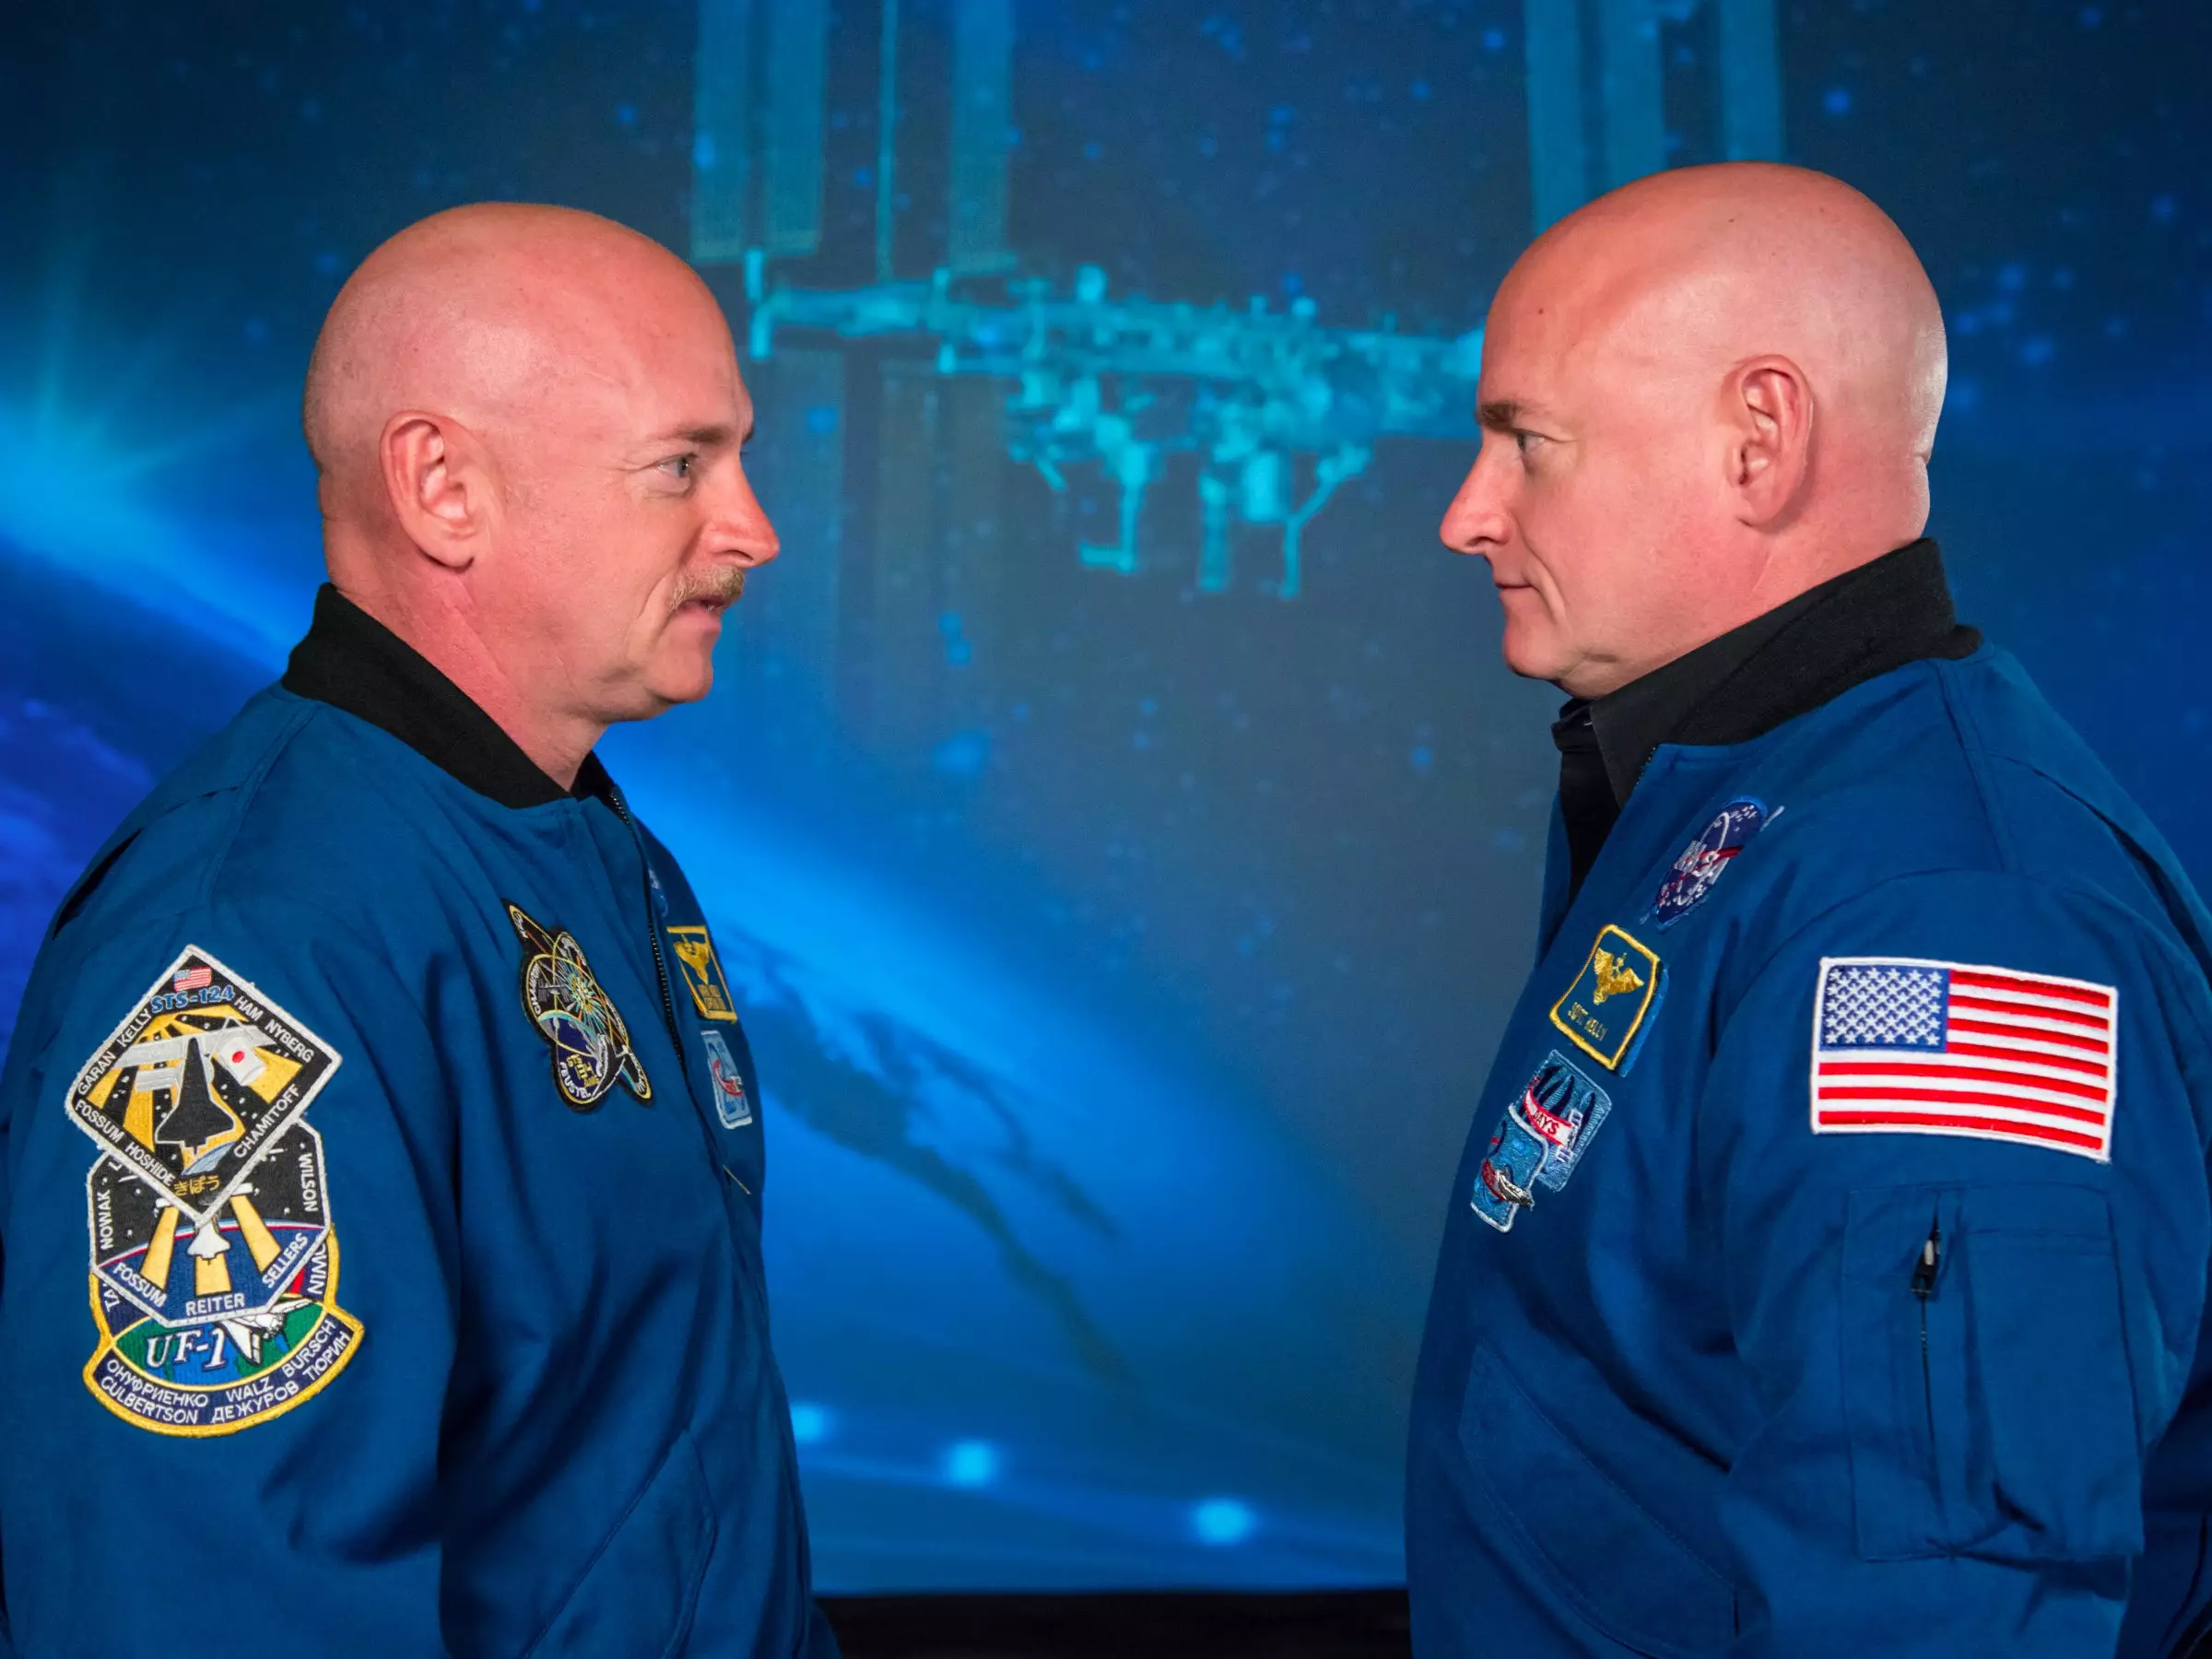 NASA Sent One Identical Twin To Space For A Year To See How It'd Change Him